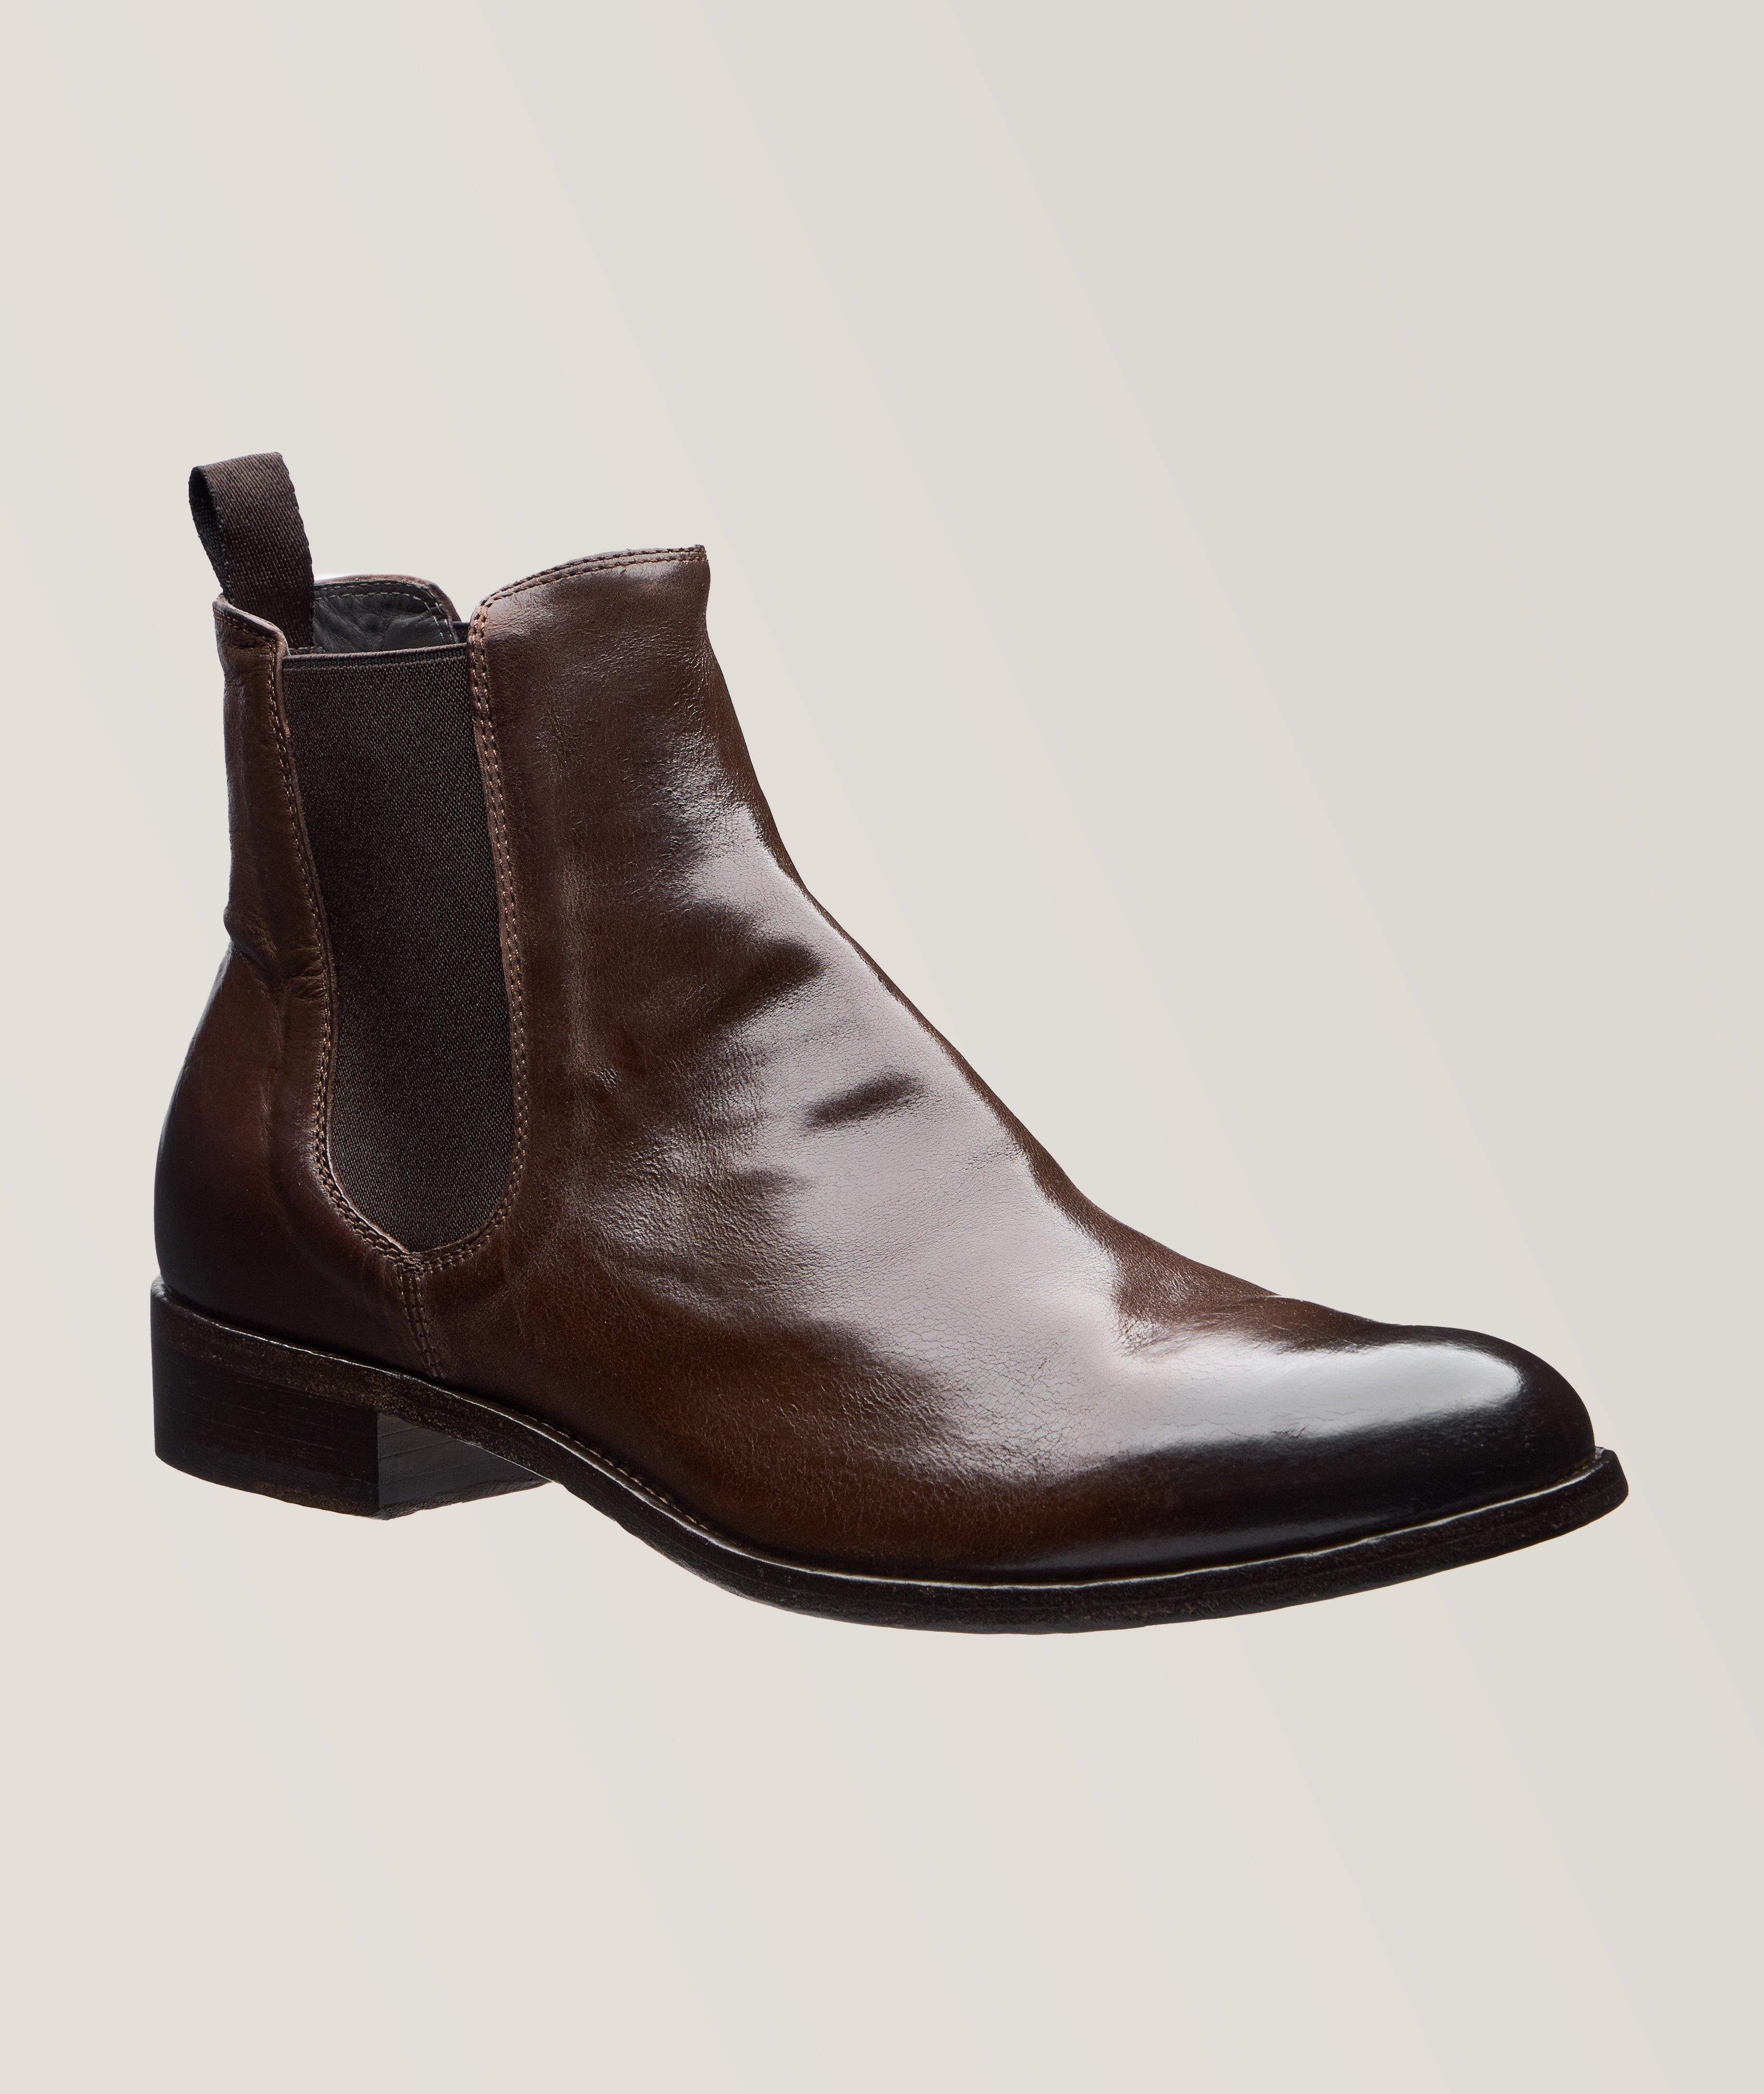 Bedell Leather Chelsea Boots image 0